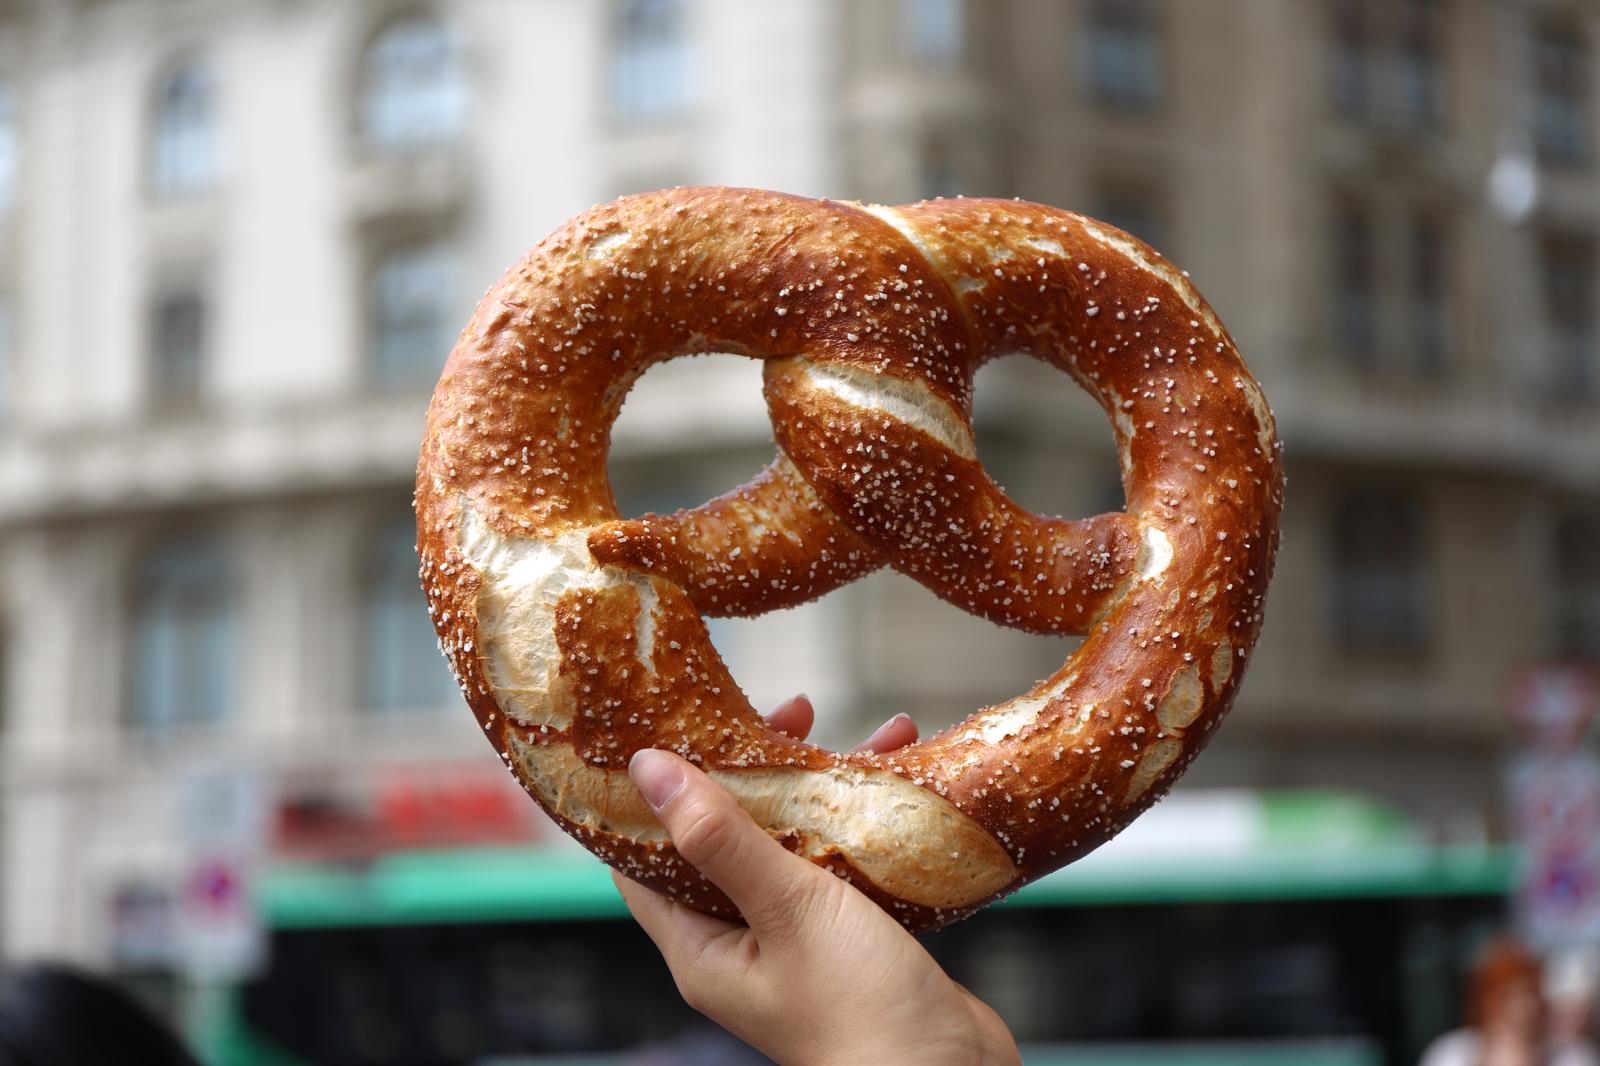 NYC Trip Planning Quiz 🗽: Can We Guess Your Age? Soft pretzel